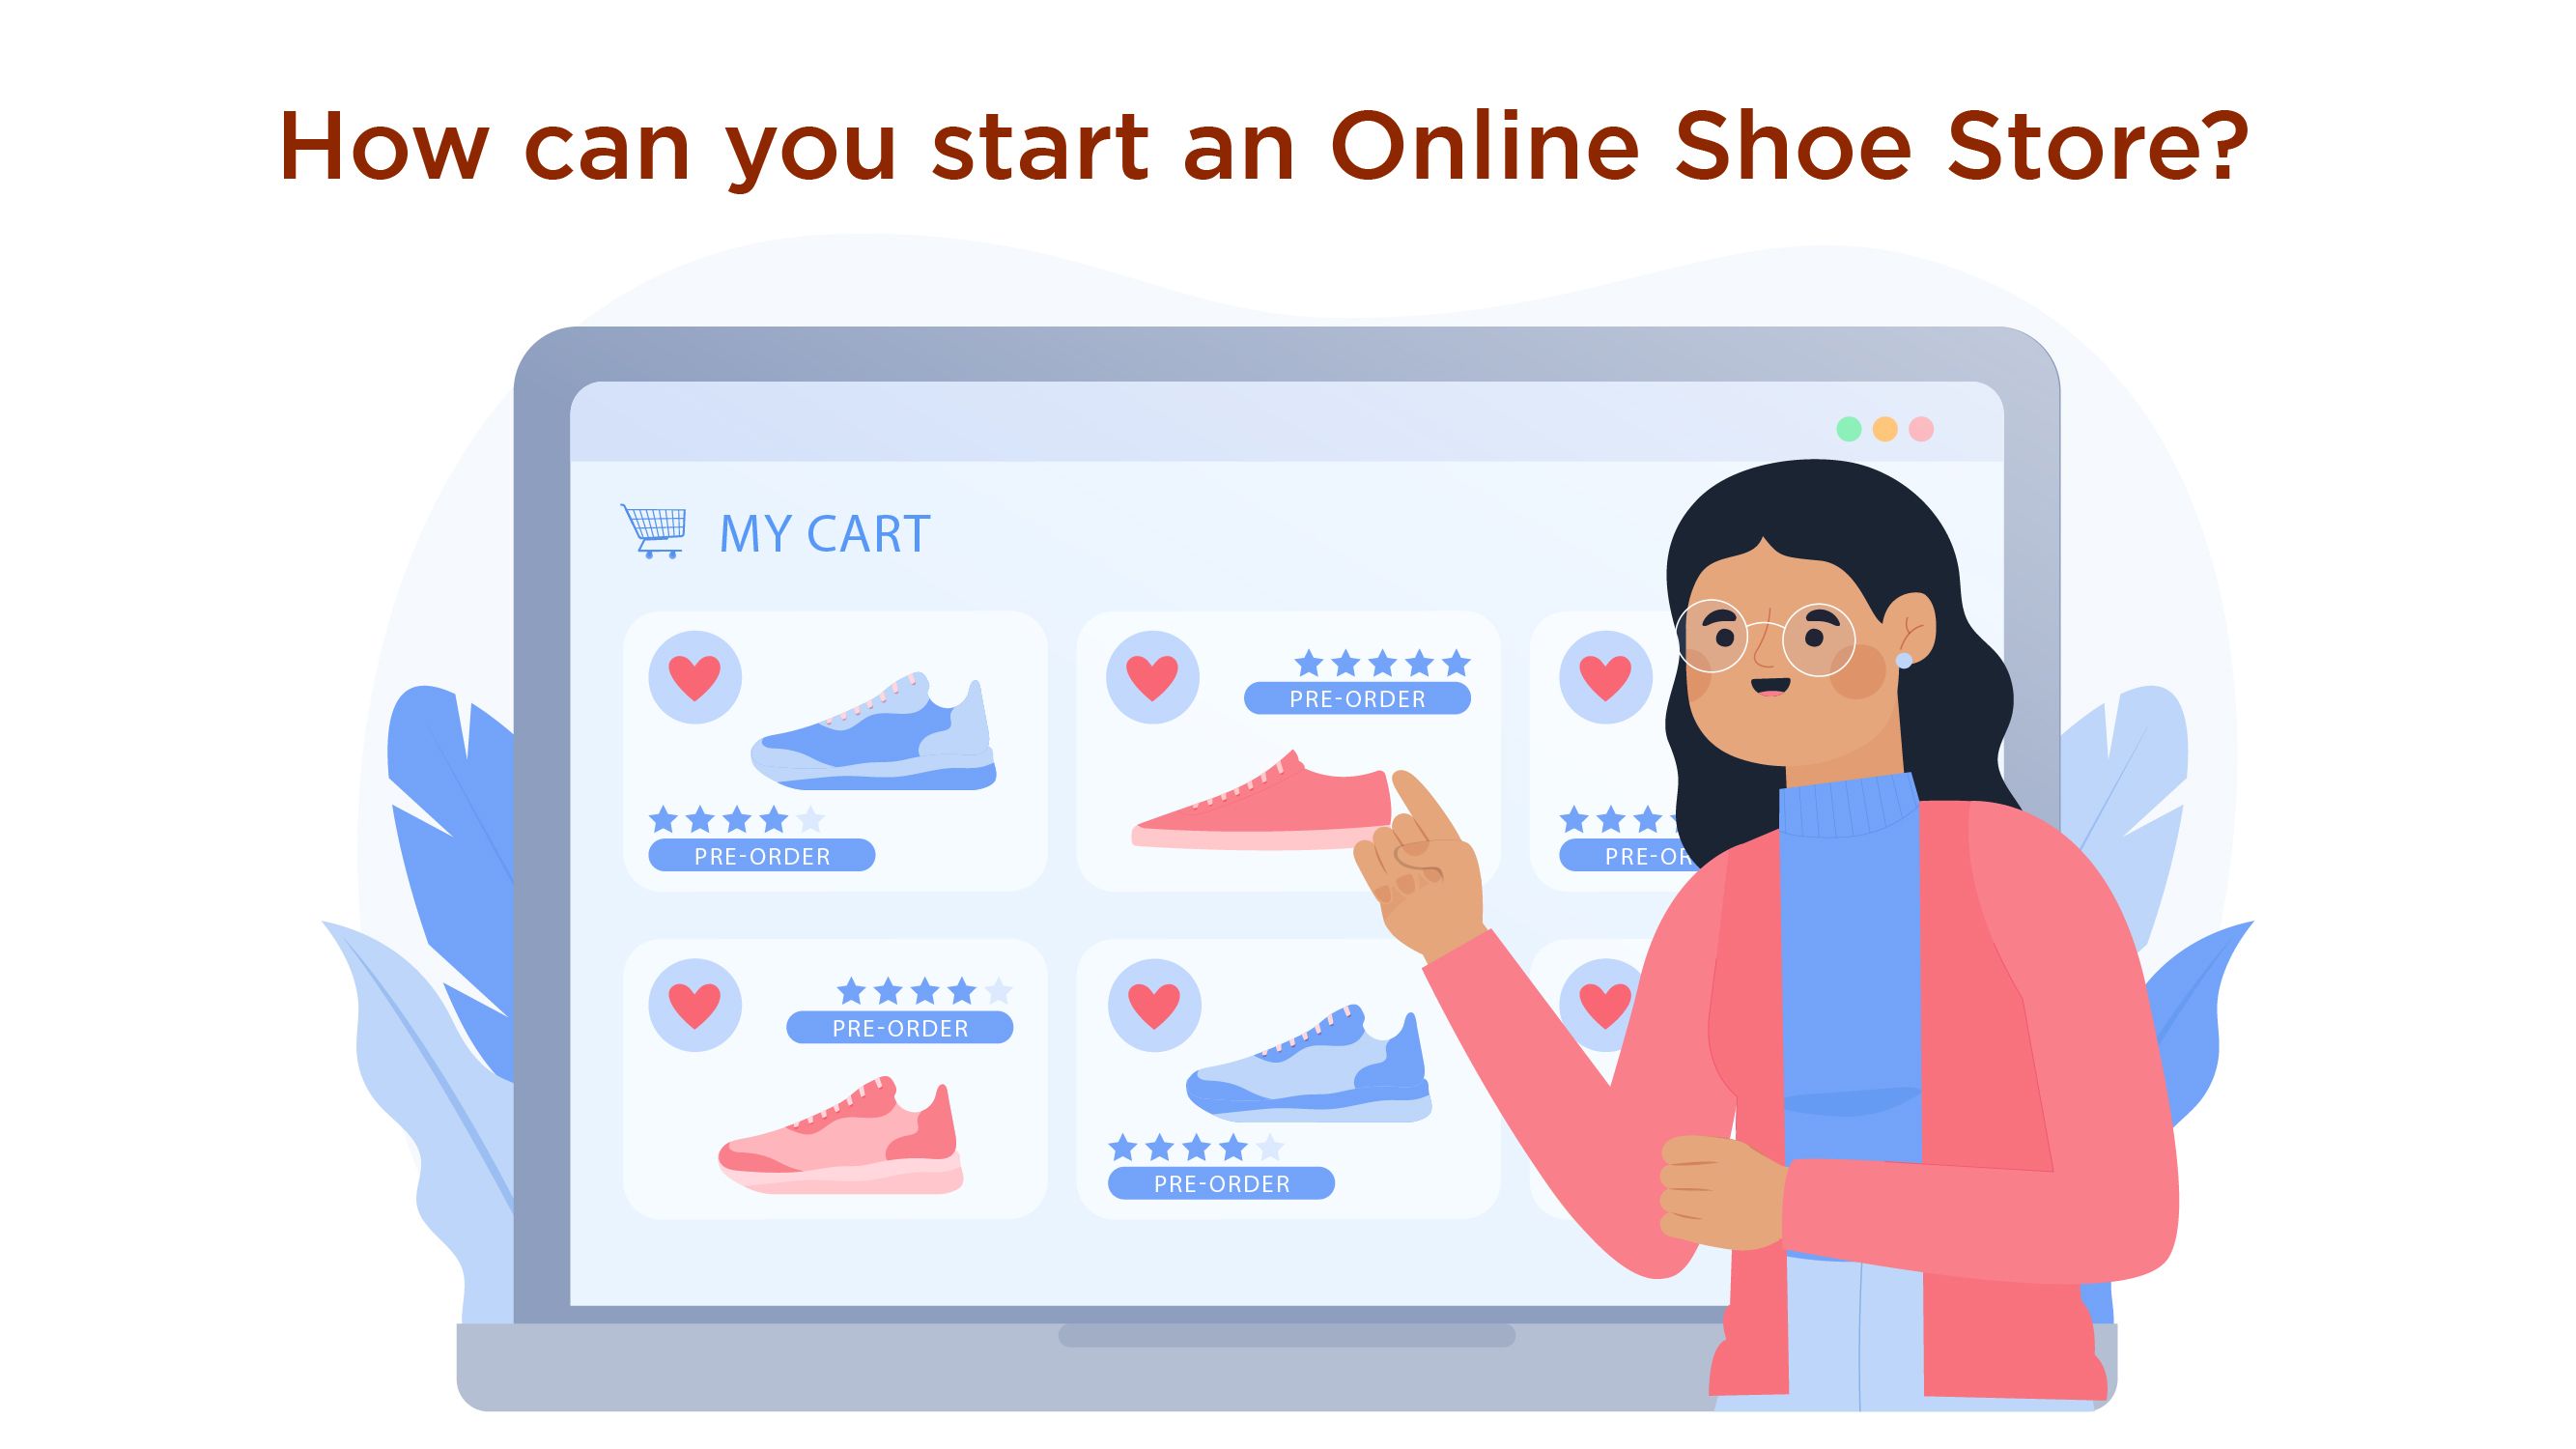 How can you start an online shoe store?